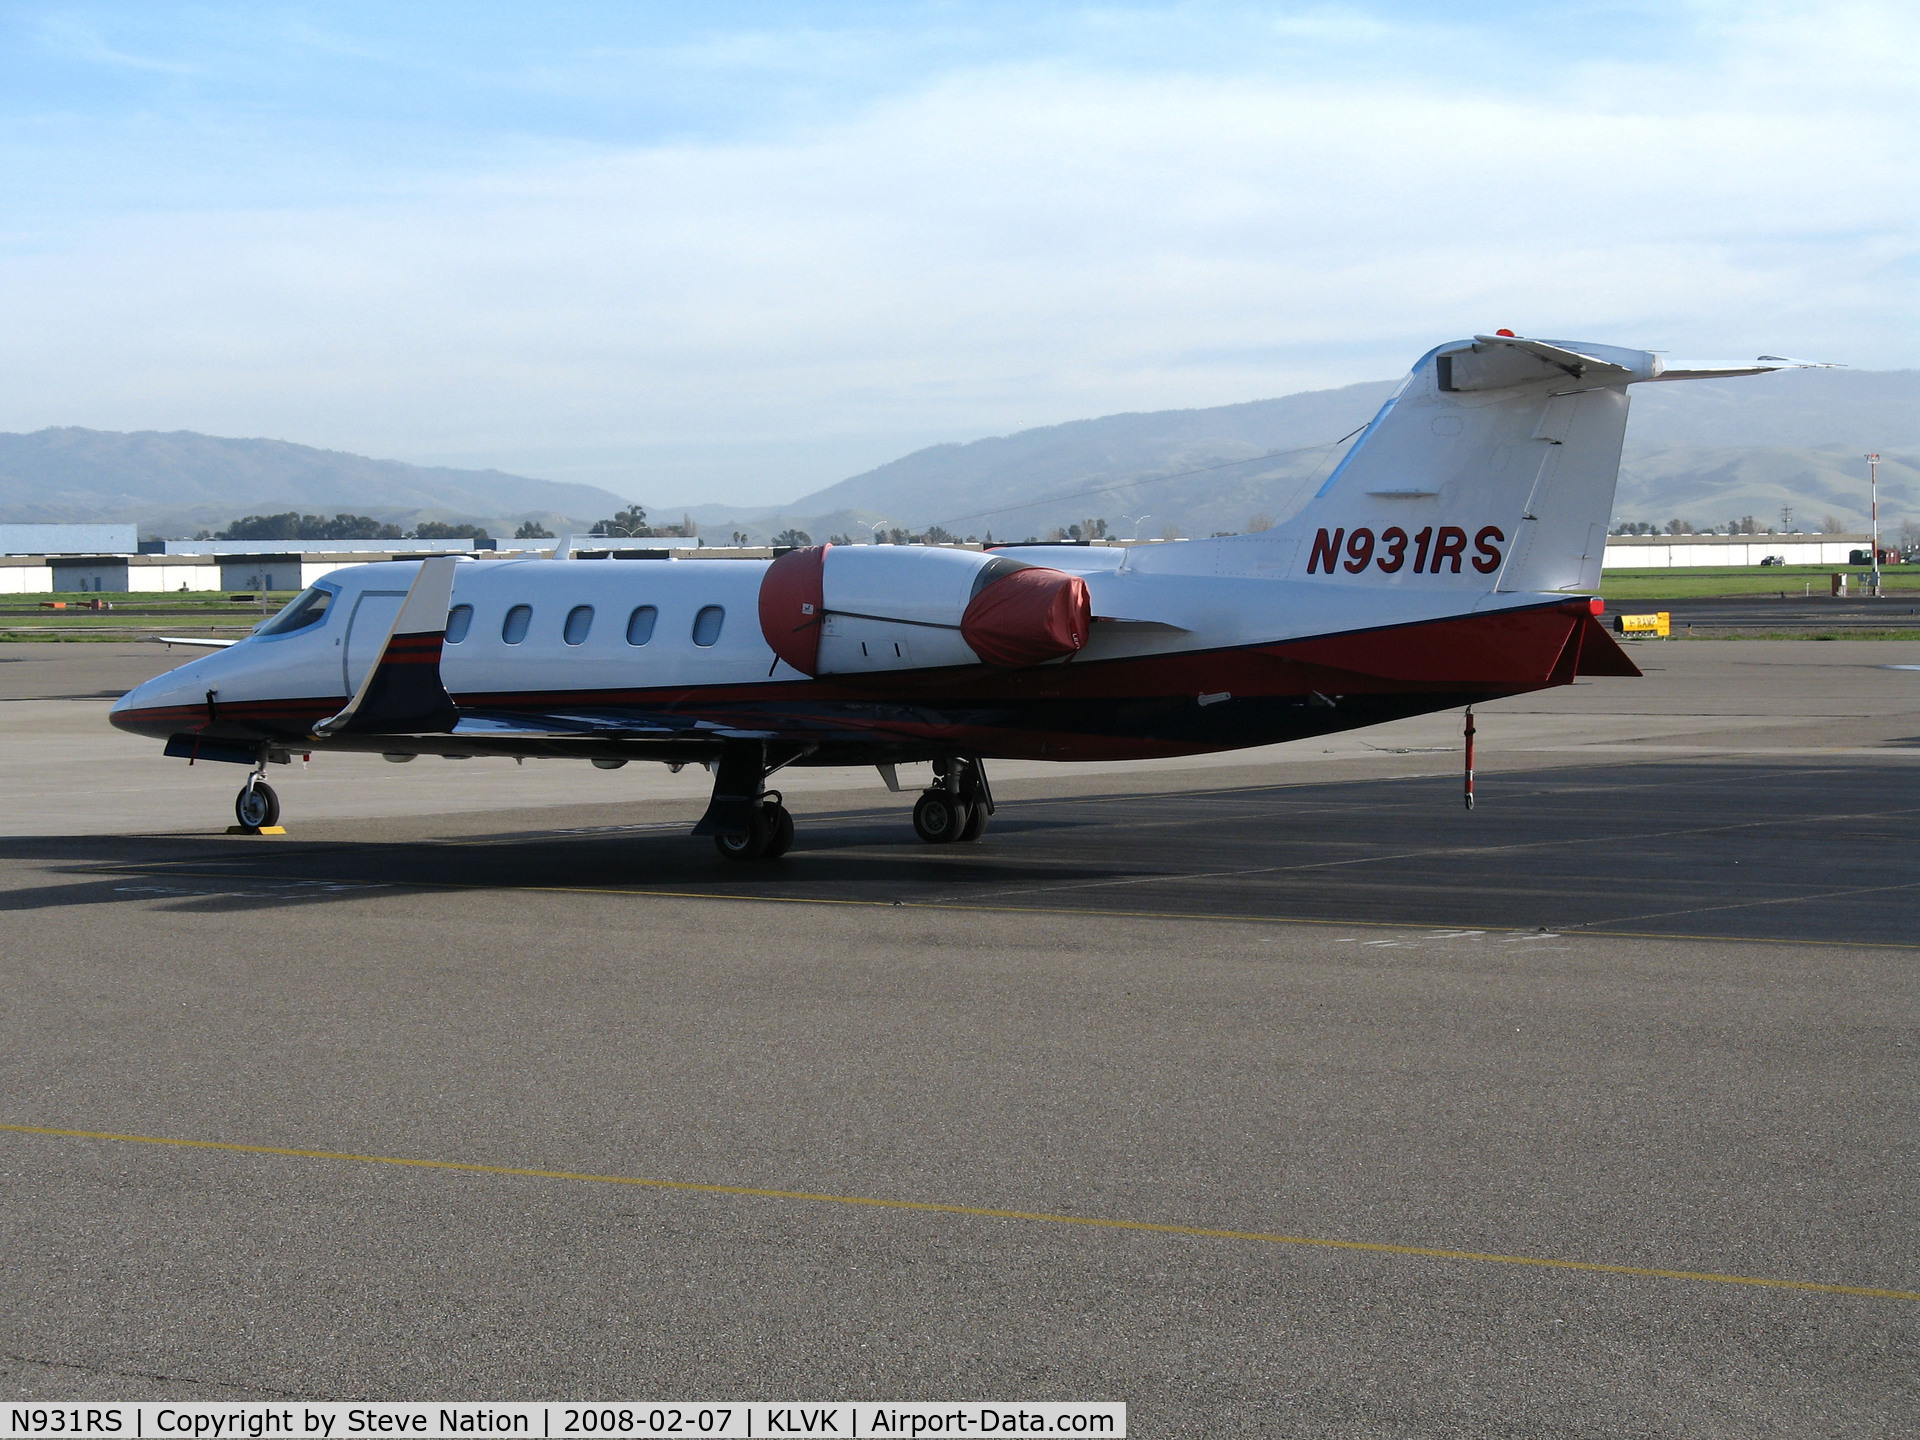 N931RS, 1999 Learjet Inc 31A C/N 184, Russell Stover Candies Inc. 1999 Learjet 31A from Kansas City, MO @ KLVK (Livermore Municipal Airport, CA)